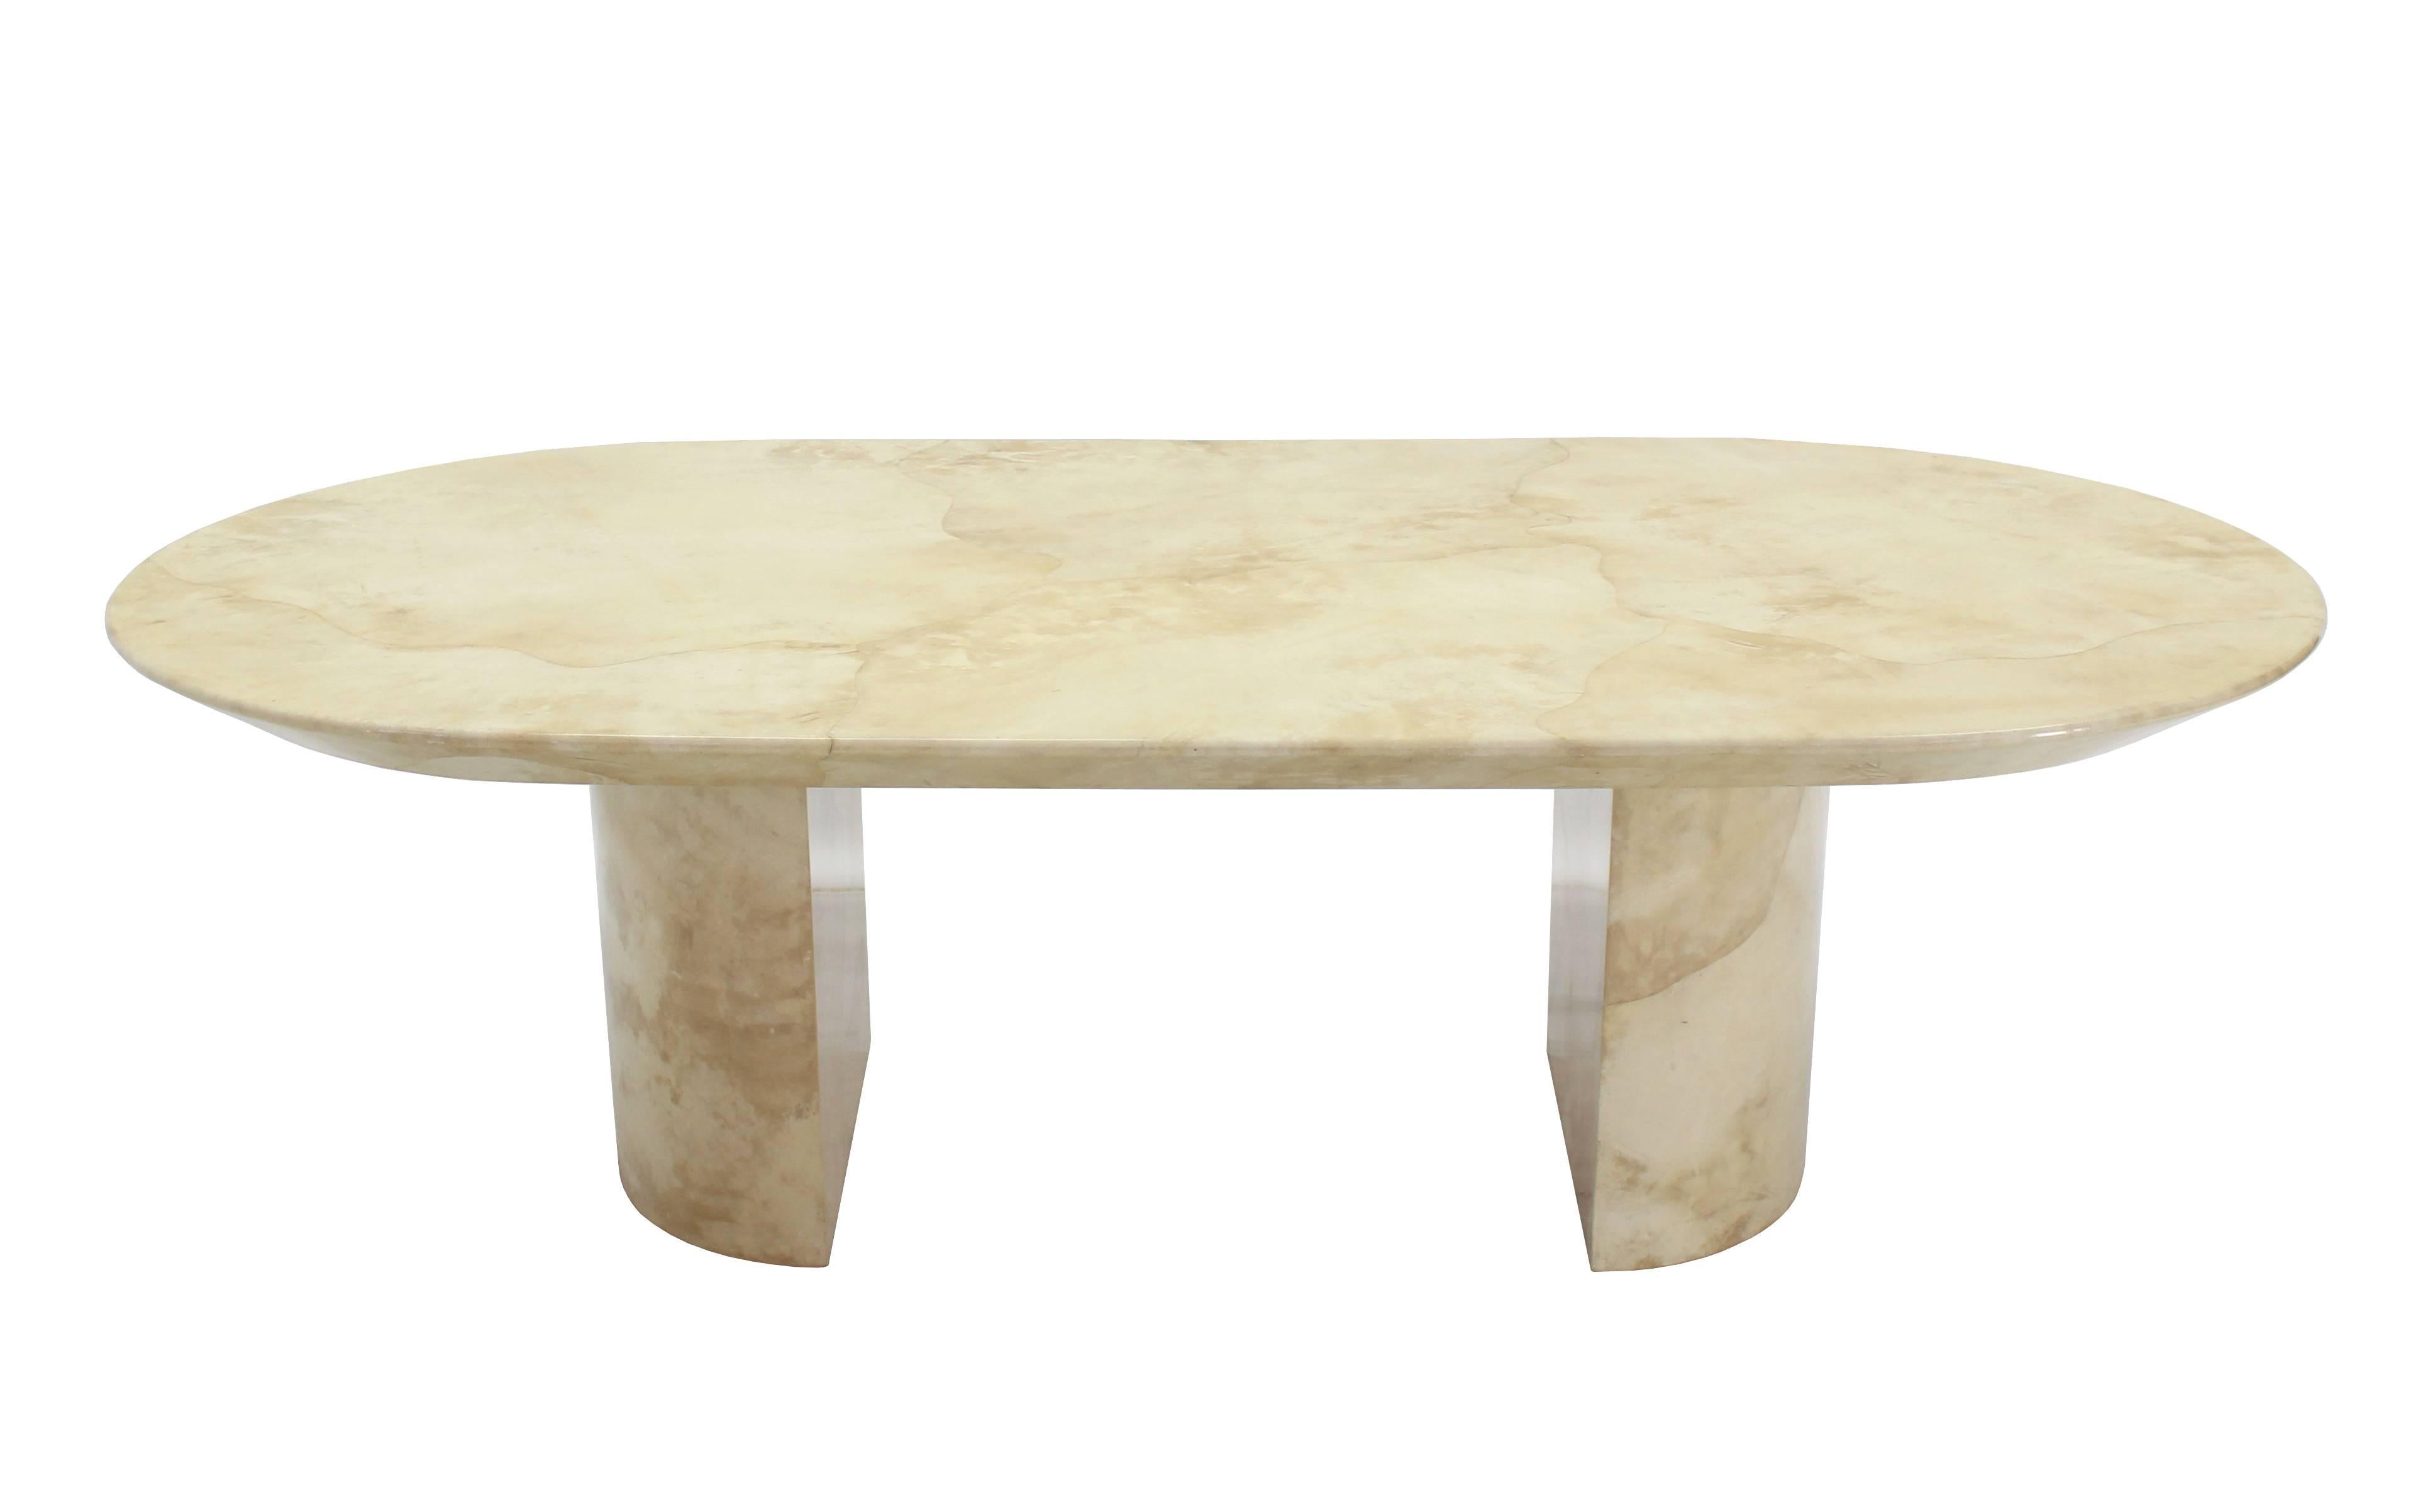 Very nice Mid-Century Modern Karl Springer oval parchment table.